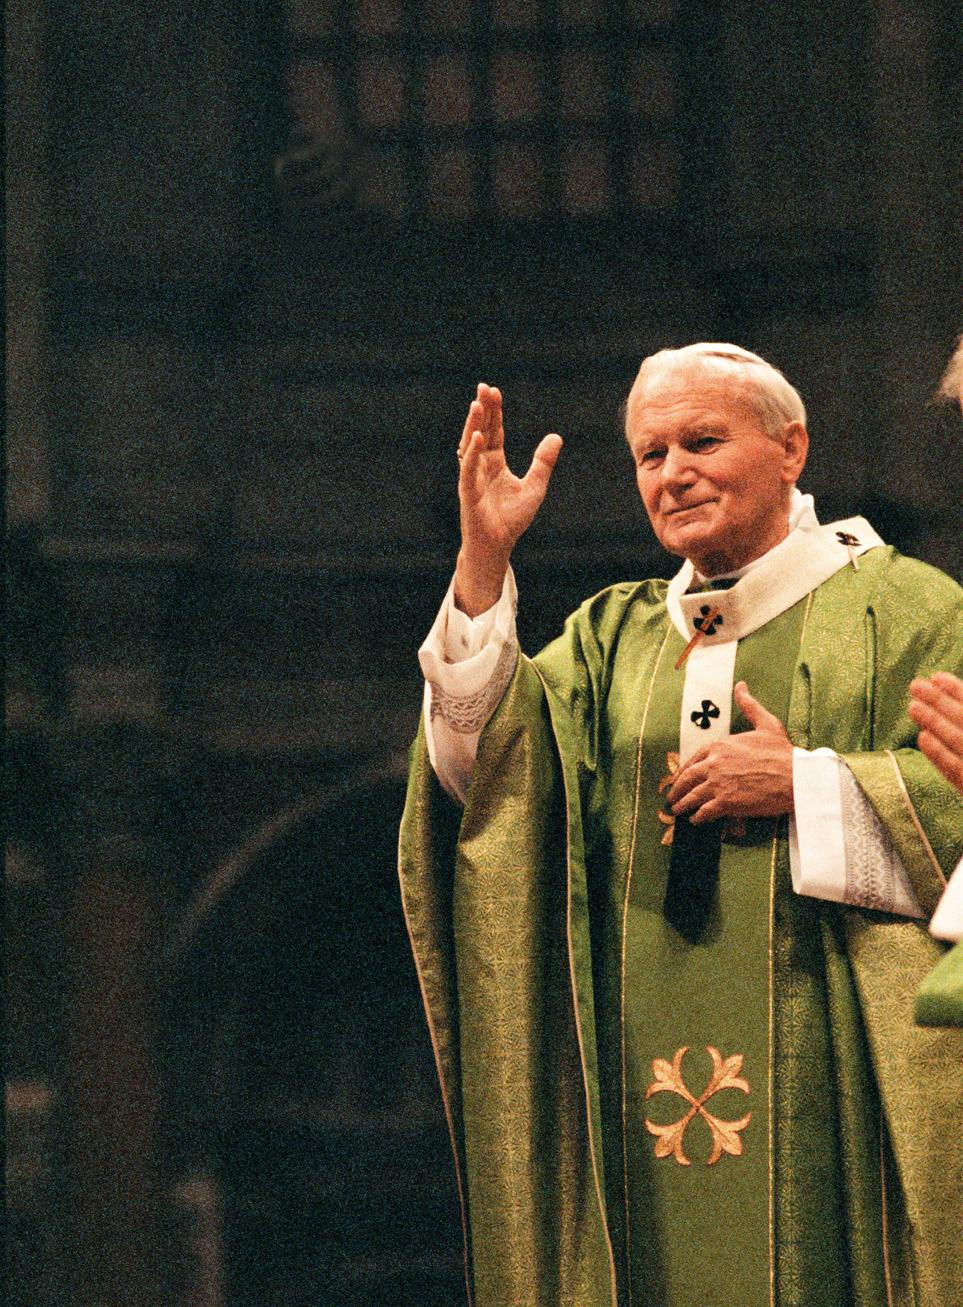 REFLECTIVE PRAYER A CHALLENGE FROM ST. JOHN PAUL II I turn especially to you, boys and girls, who find yourselves at the decisive moment of choice.